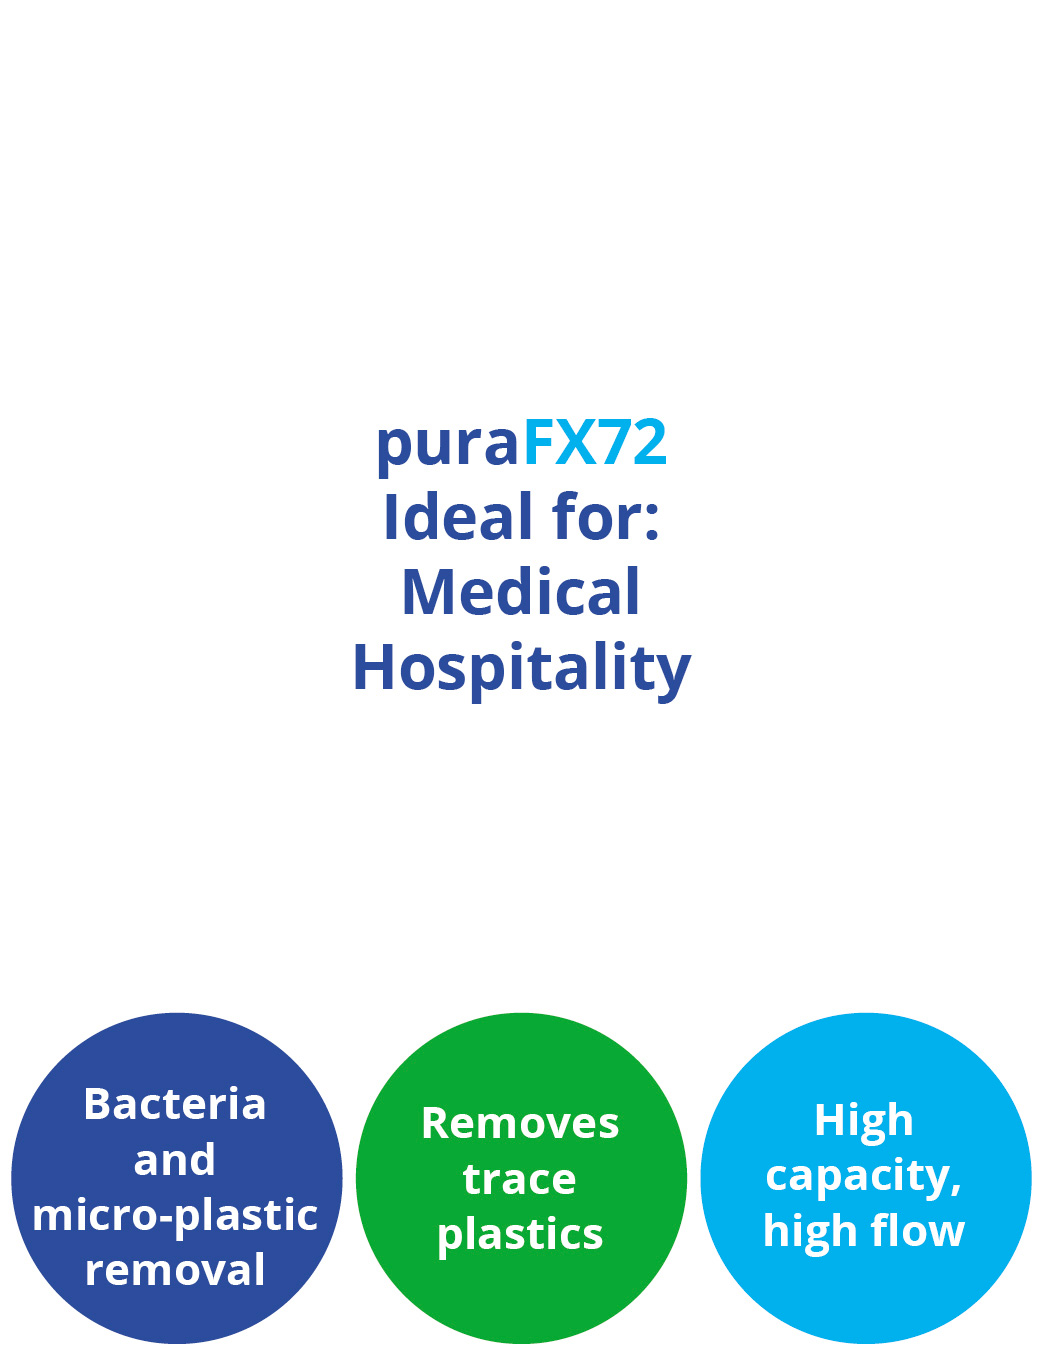 purafx72 Advanced Water Filter for medical use